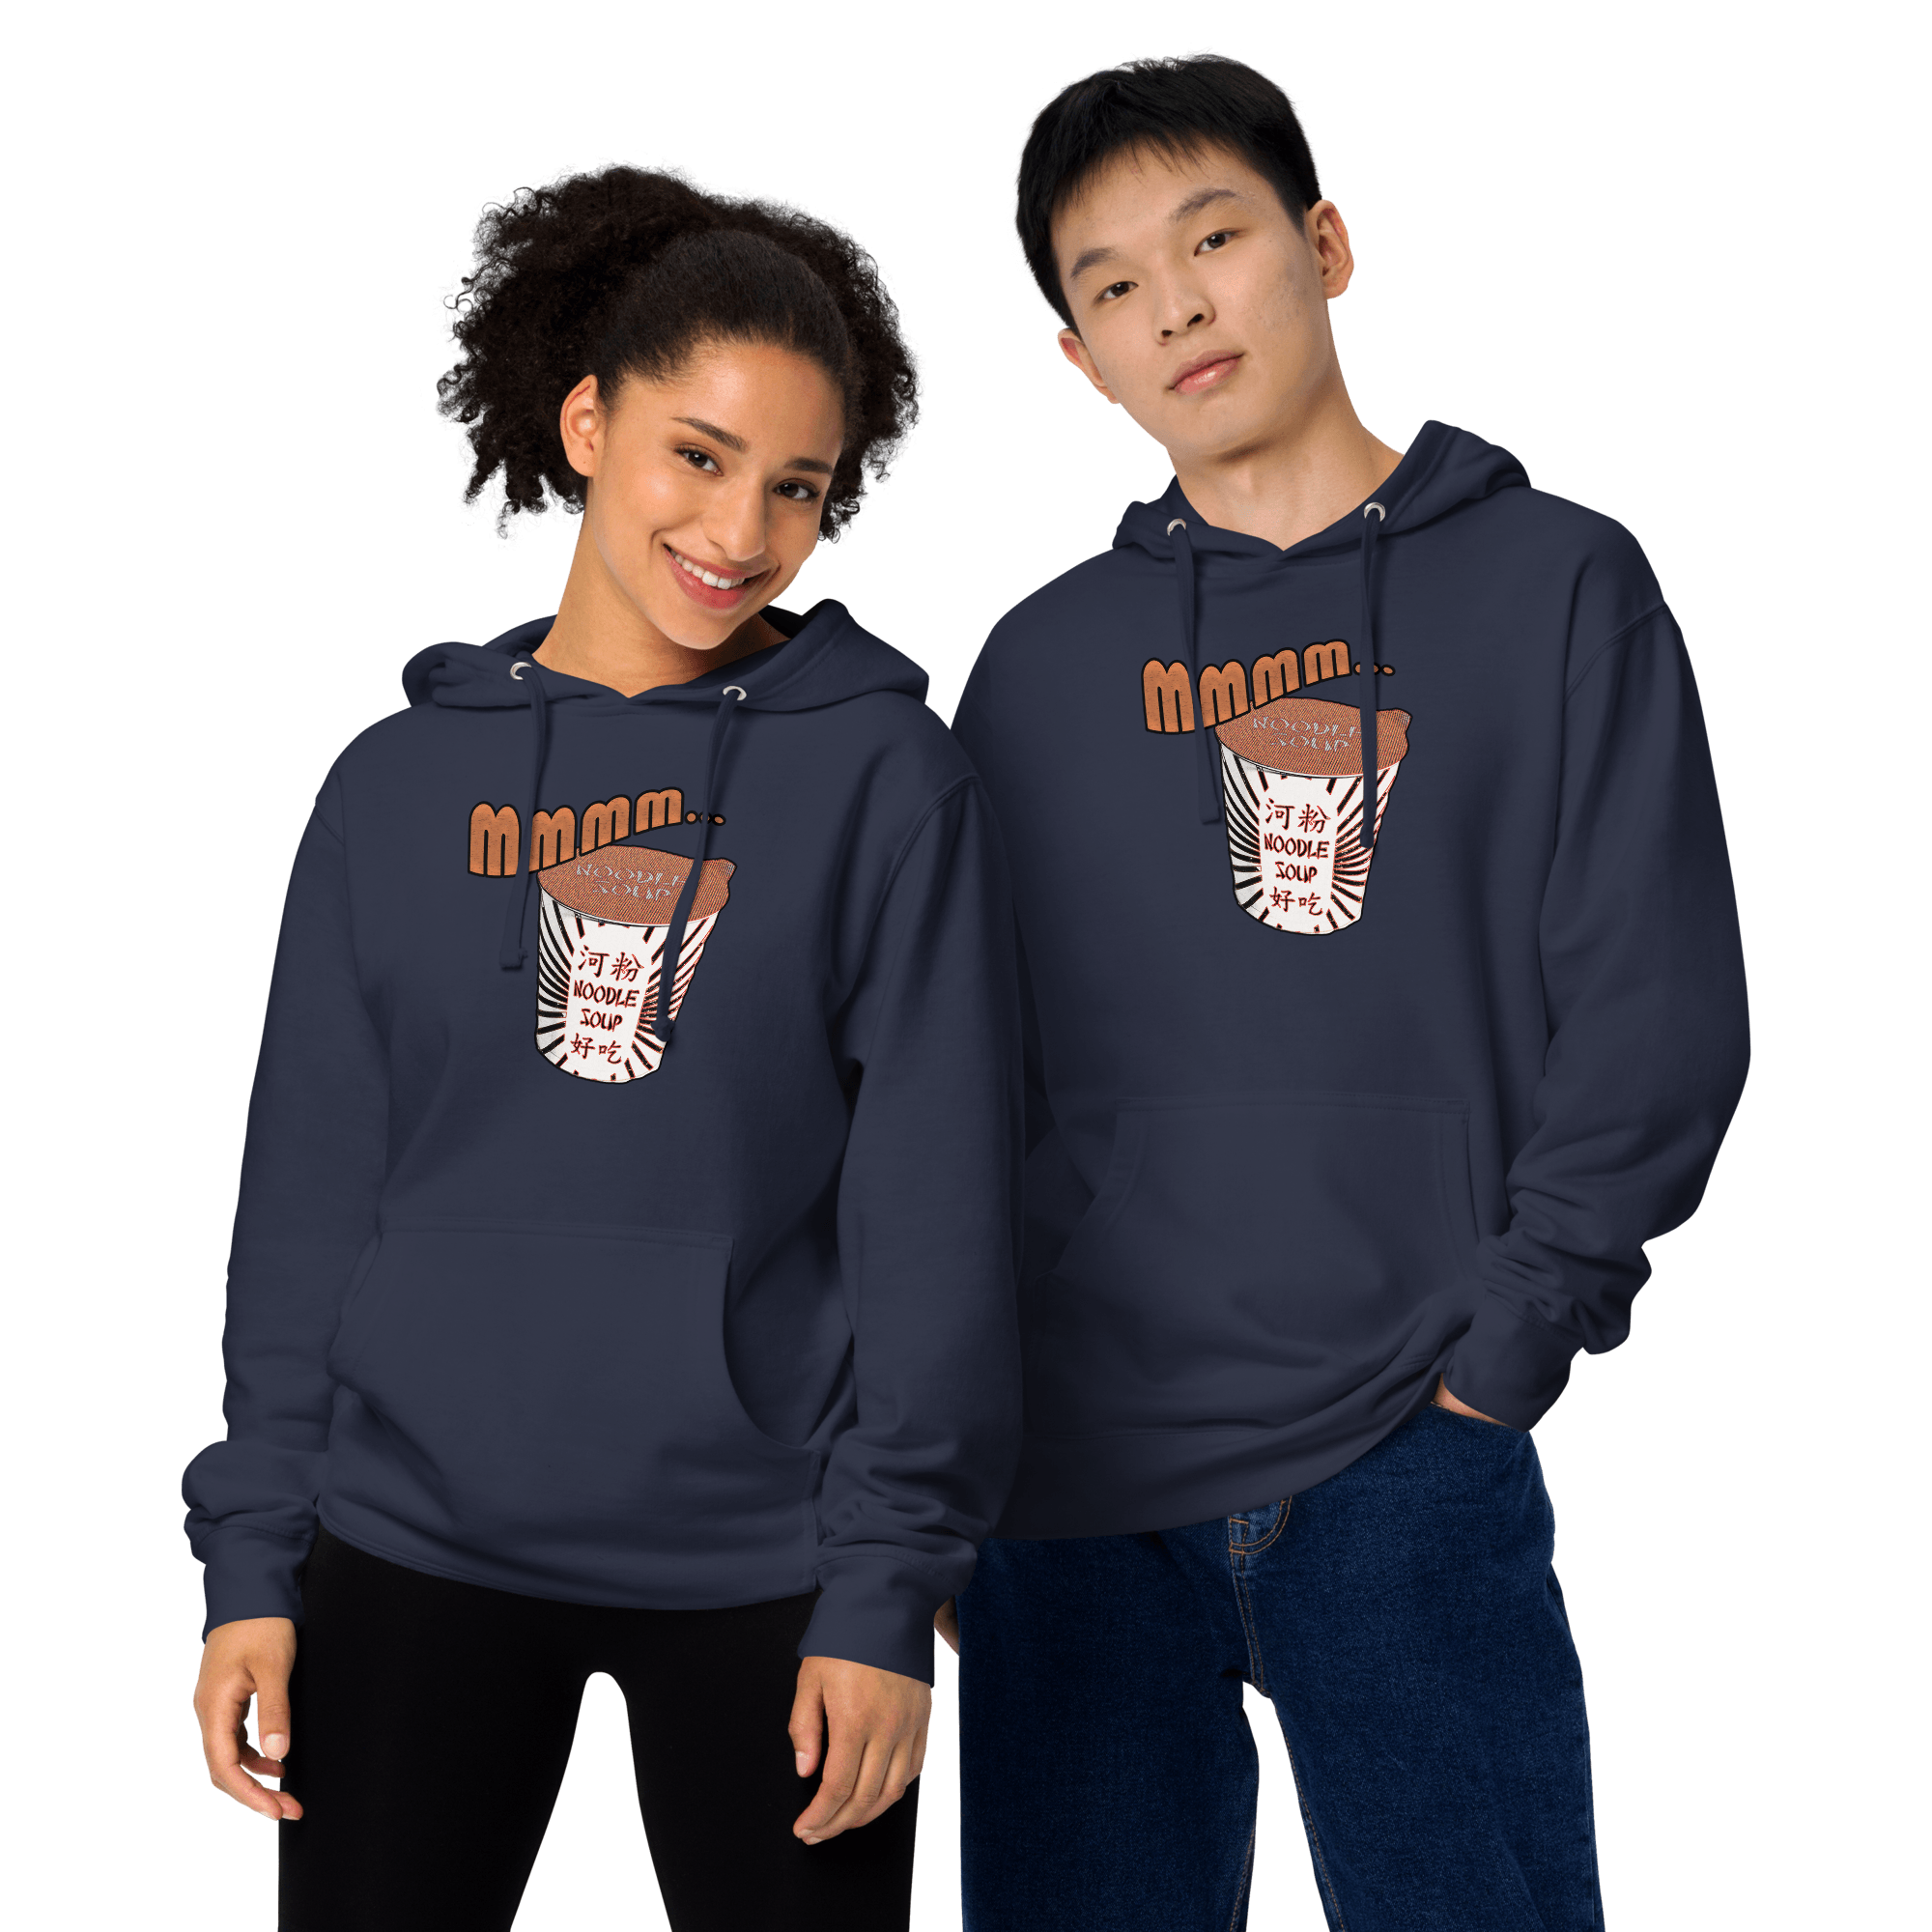 Mmm, Noodle Soup Unisex midweight hoodie